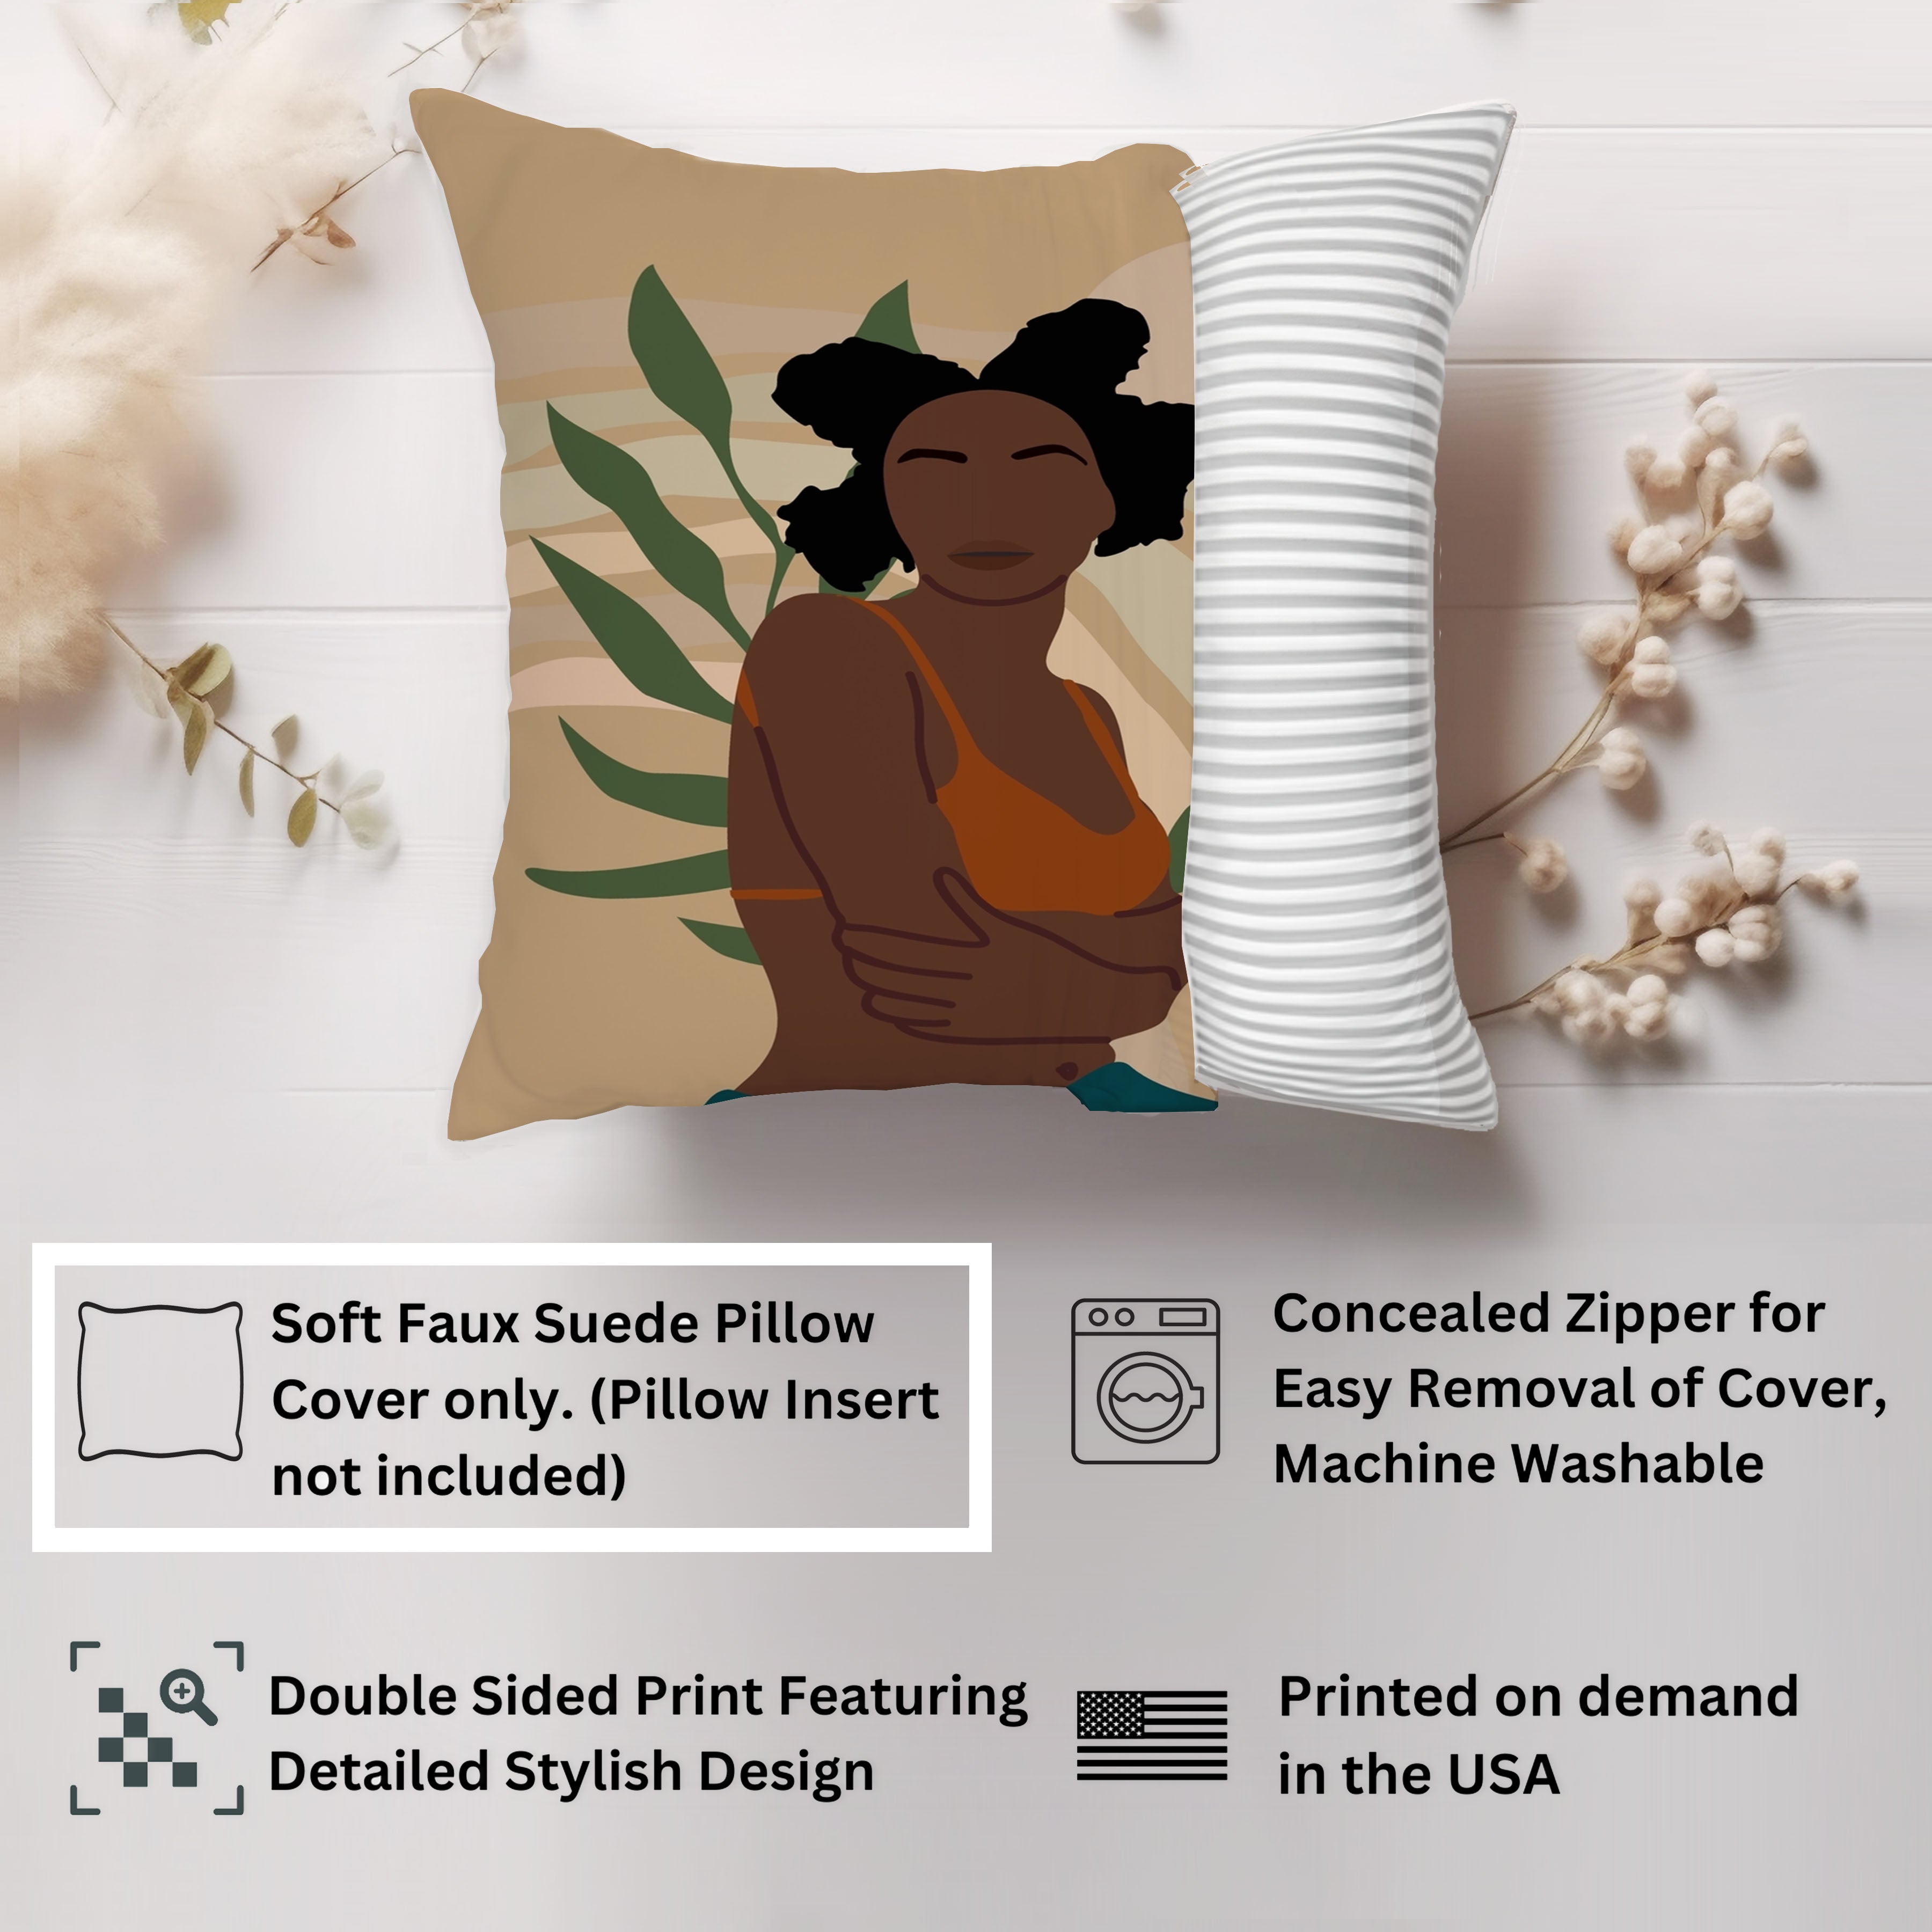 Ethan Taylor People & Portraits Throw Pillow Soft Cushion Cover African American Women Divinely Made Portraits Female Bohemian Decorative Square Accent Pillow Case, 18x18 Inches, Blue, Green - image 2 of 5